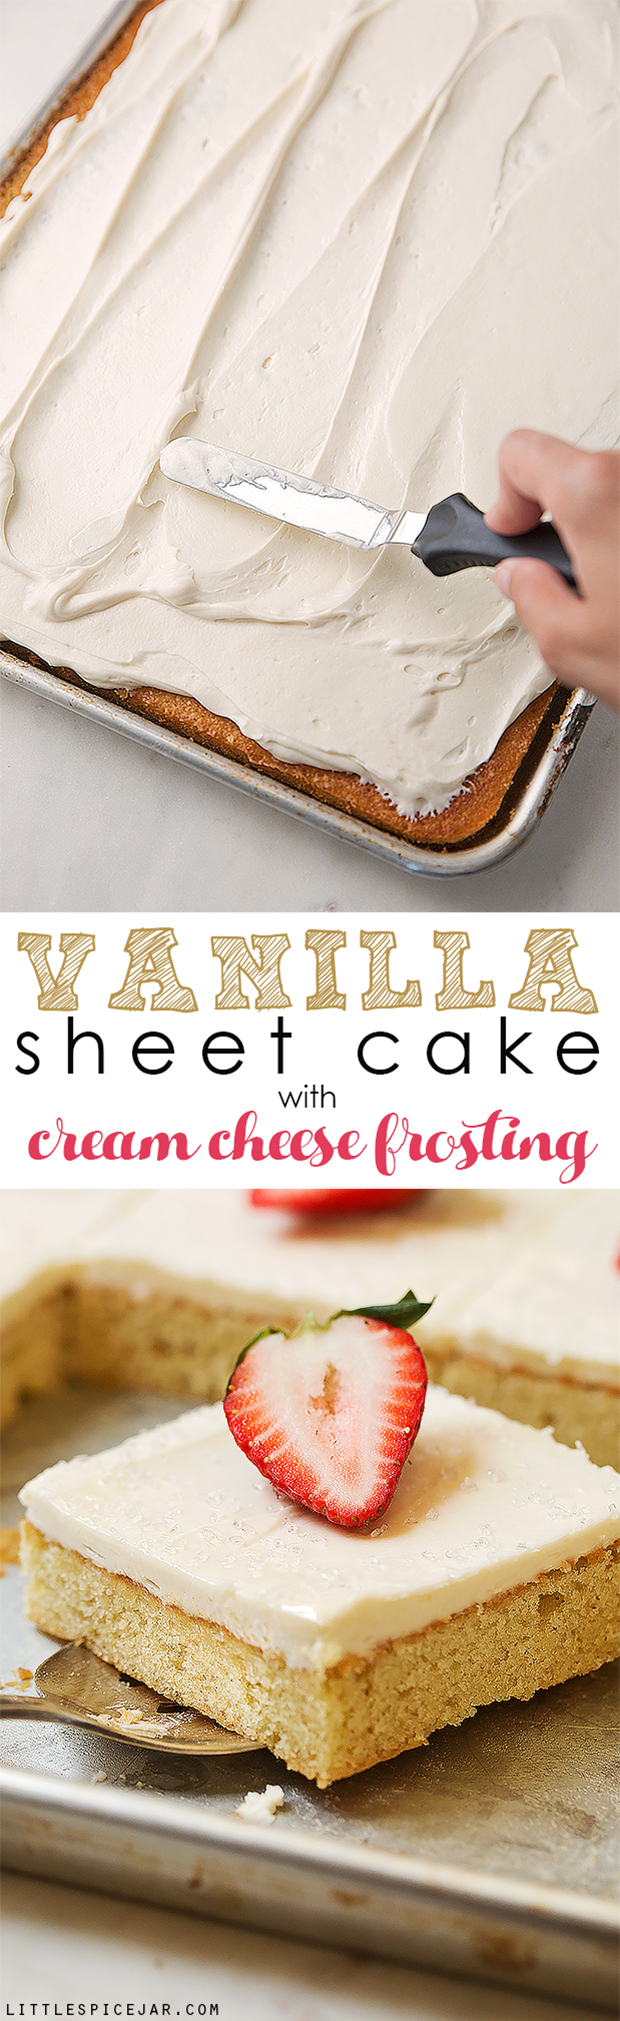 Texas-sized vanilla sheet cake with cream cheese frosting - a simple vanilla sheet cake with a sweet and tangy frosting! So good and feeds a crowd! #creamcheesefrosting #vanillasheetcake #texassheetcake #sheetcake | Littlespicejar.com